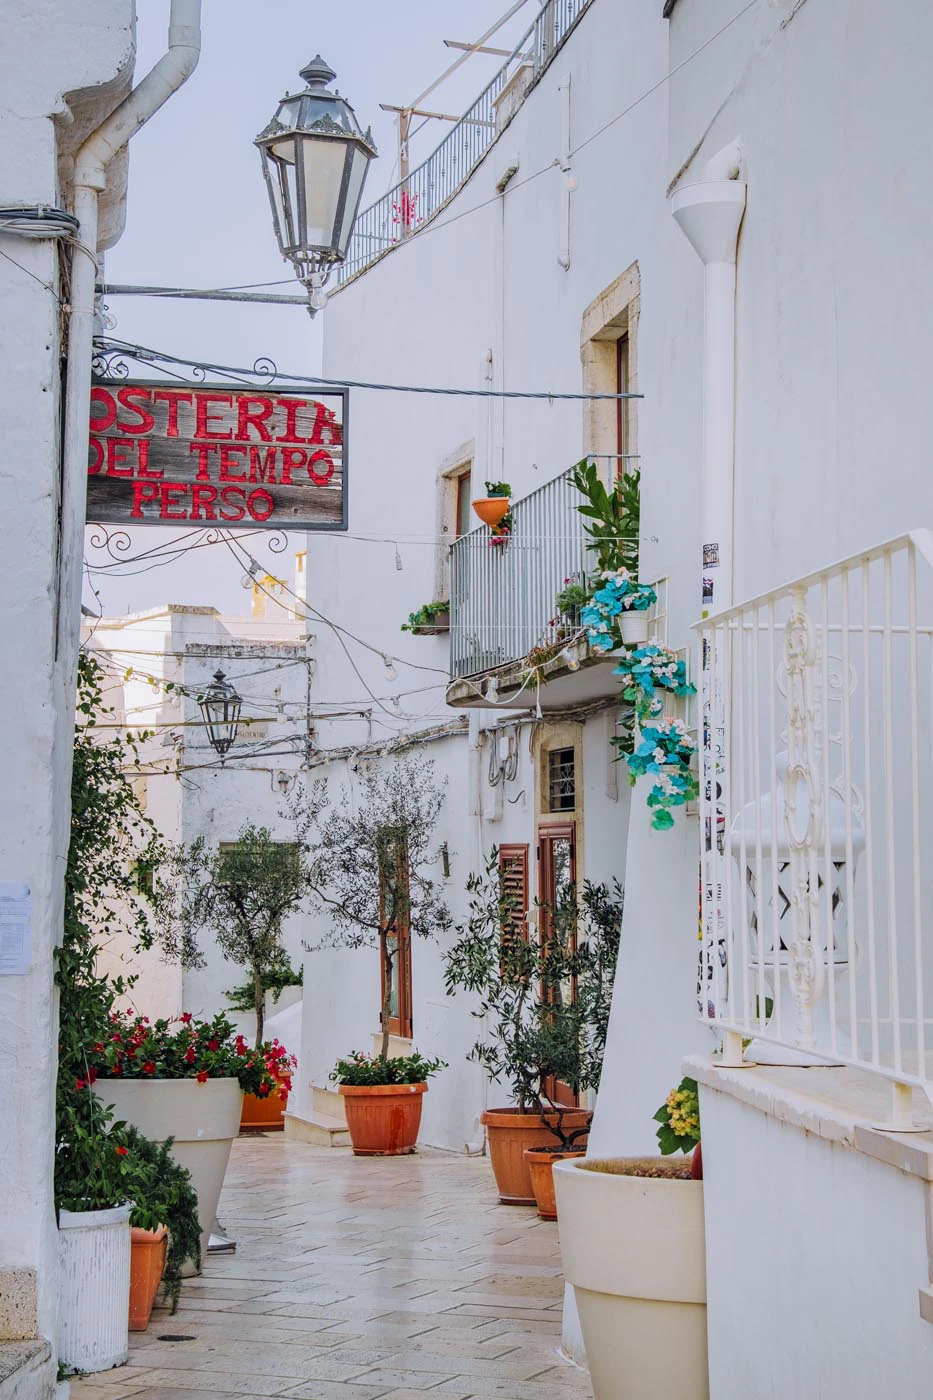 Things to do in Ostuni - Where to eat - Osteria del Tempo Perso